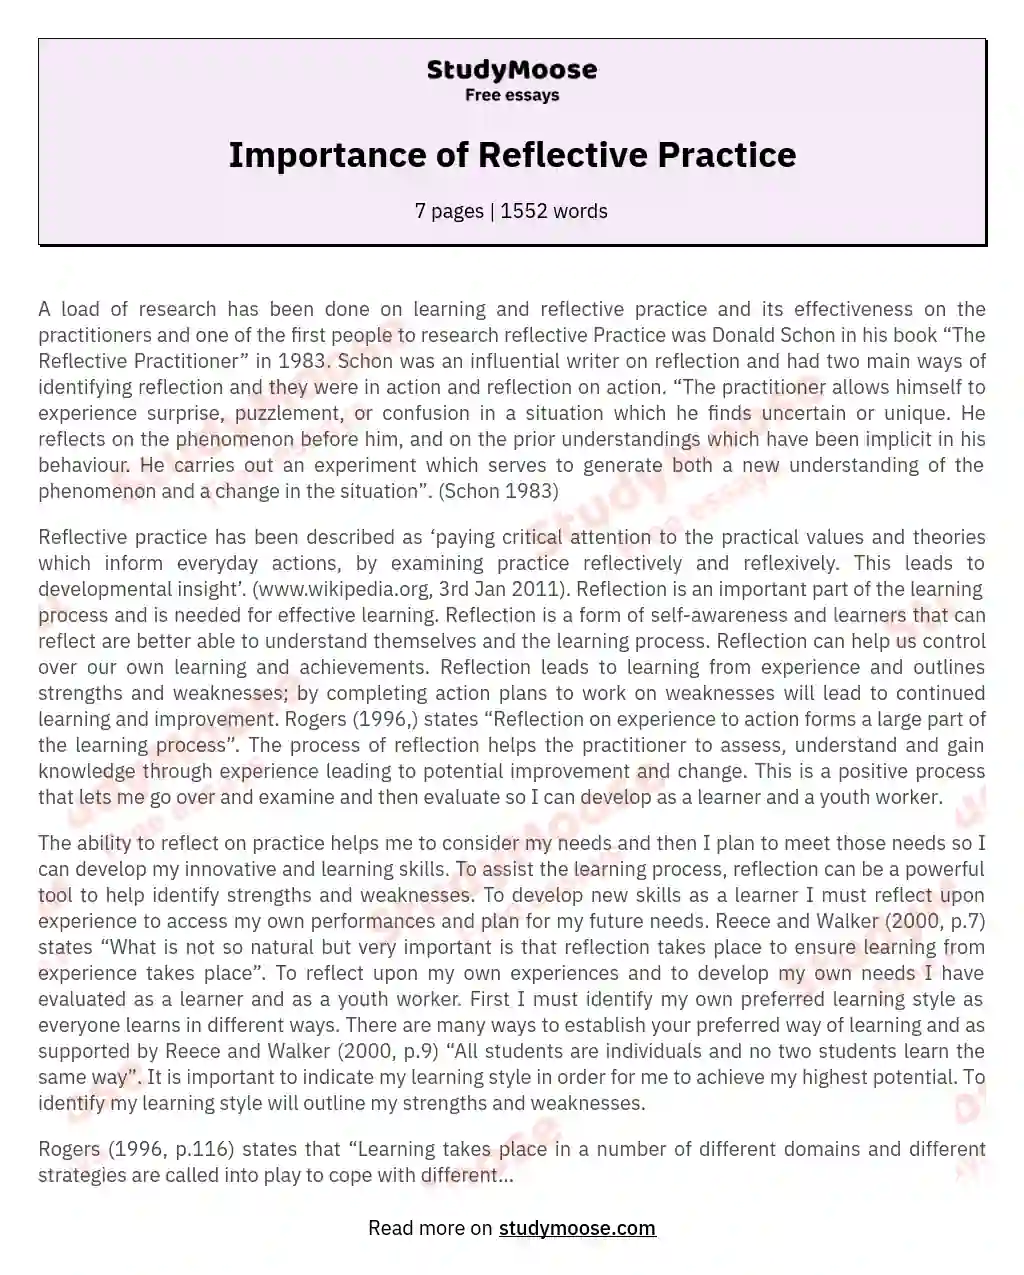 Importance of Reflective Practice essay